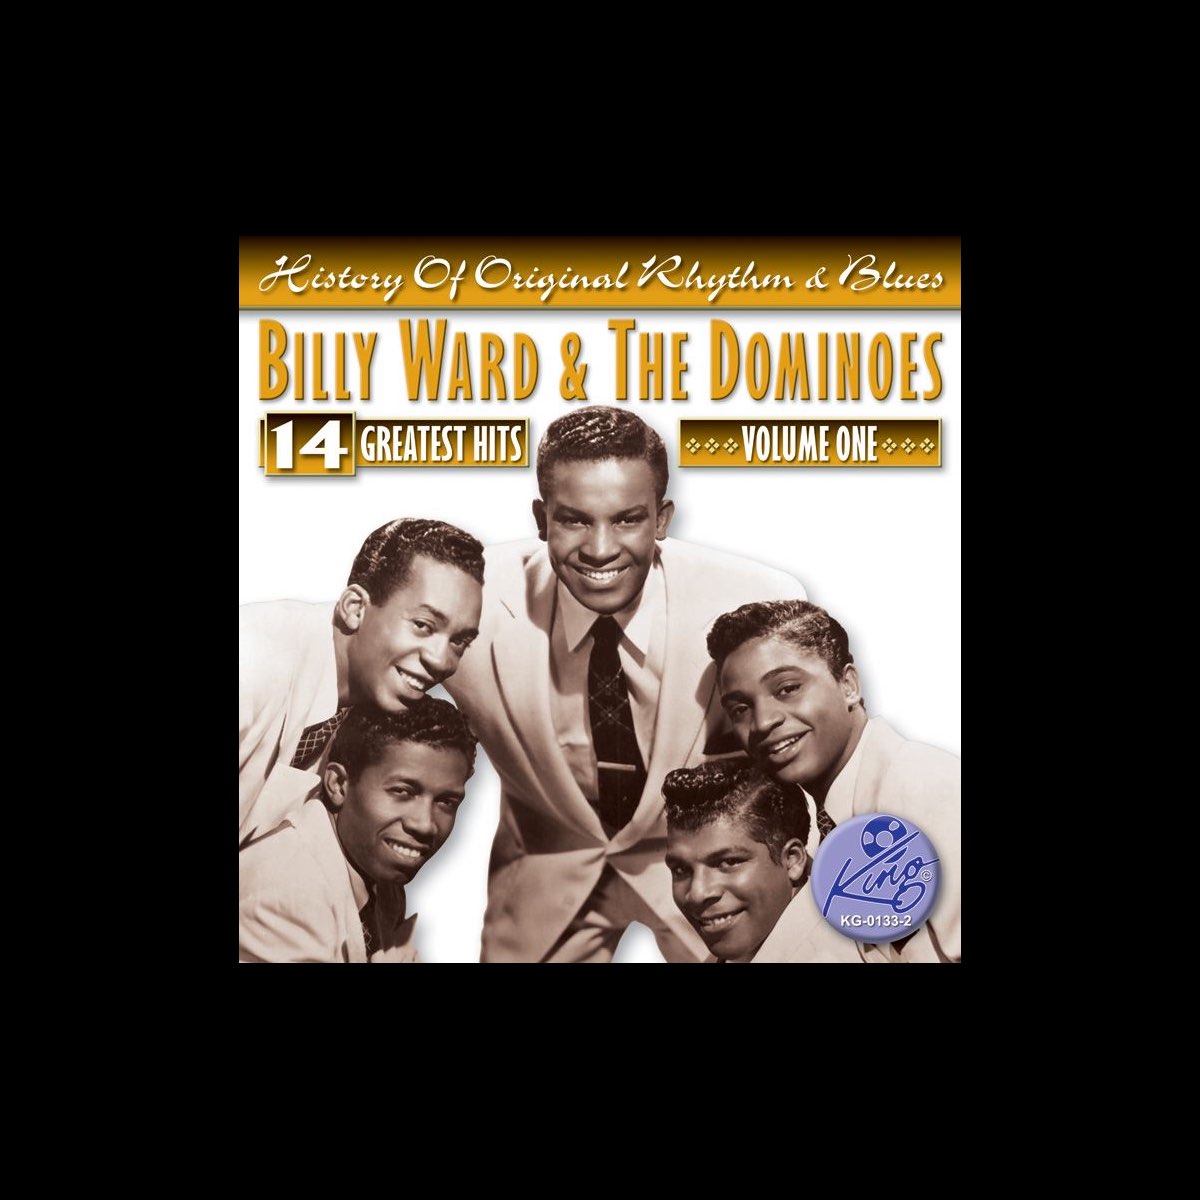 ‎Billy Ward & The Dominoes: 14 Greatest Hits, Vol. 1 by Billy Ward ...